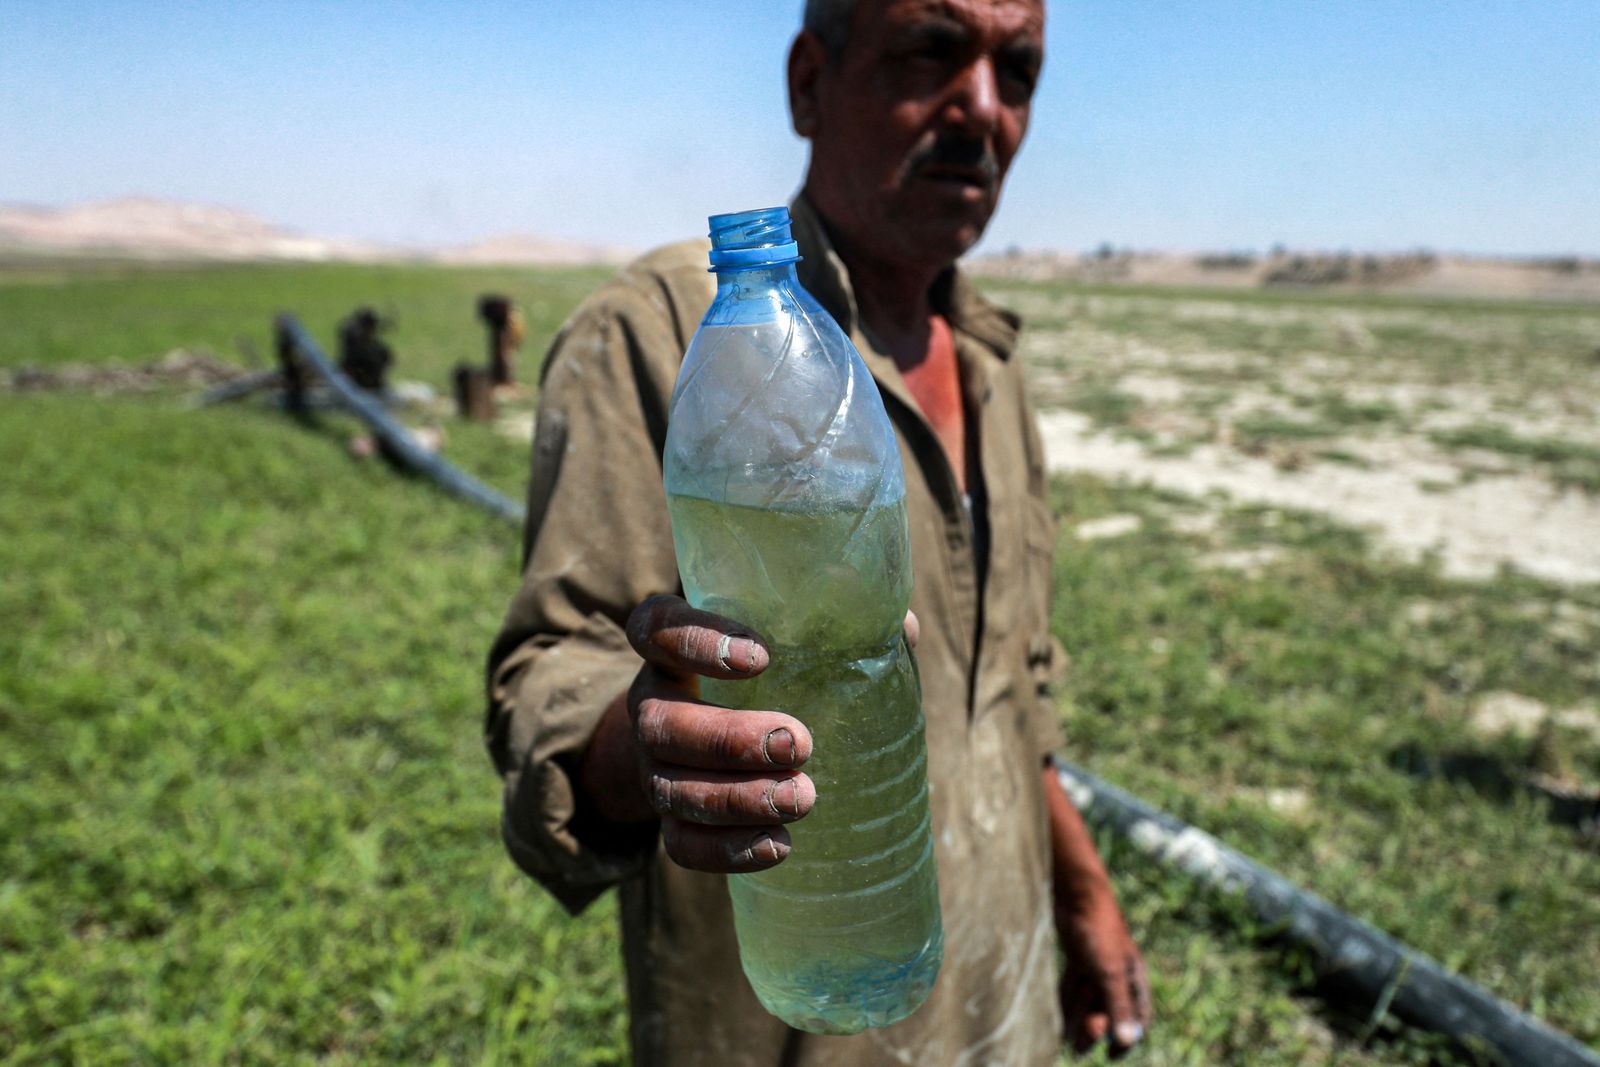 A man holds a nearly-full water bottle while standing near a pump drawing water from shallows of the Lake Assad reservoir along the Euphrates river by the town of Rumaylah in eastern Syria on July 25, 2021, as the area experiences unprecedented lower water levels since the dam was built in the mid-20th century. - Aid groups and engineers are warning of a looming humanitarian disaster in northeast Syria, where plummeting water levels at hydroelectric dams since January are threatening water and power cutoffs for millions amidst the coronavirus pandemic and economic crisis. Many in the Kurdish-held area are accusing neighbour and archfoe Turkey of weaponising water by tightening the tap upstream. (Photo by Delil SOULEIMAN / AFP) - AFP